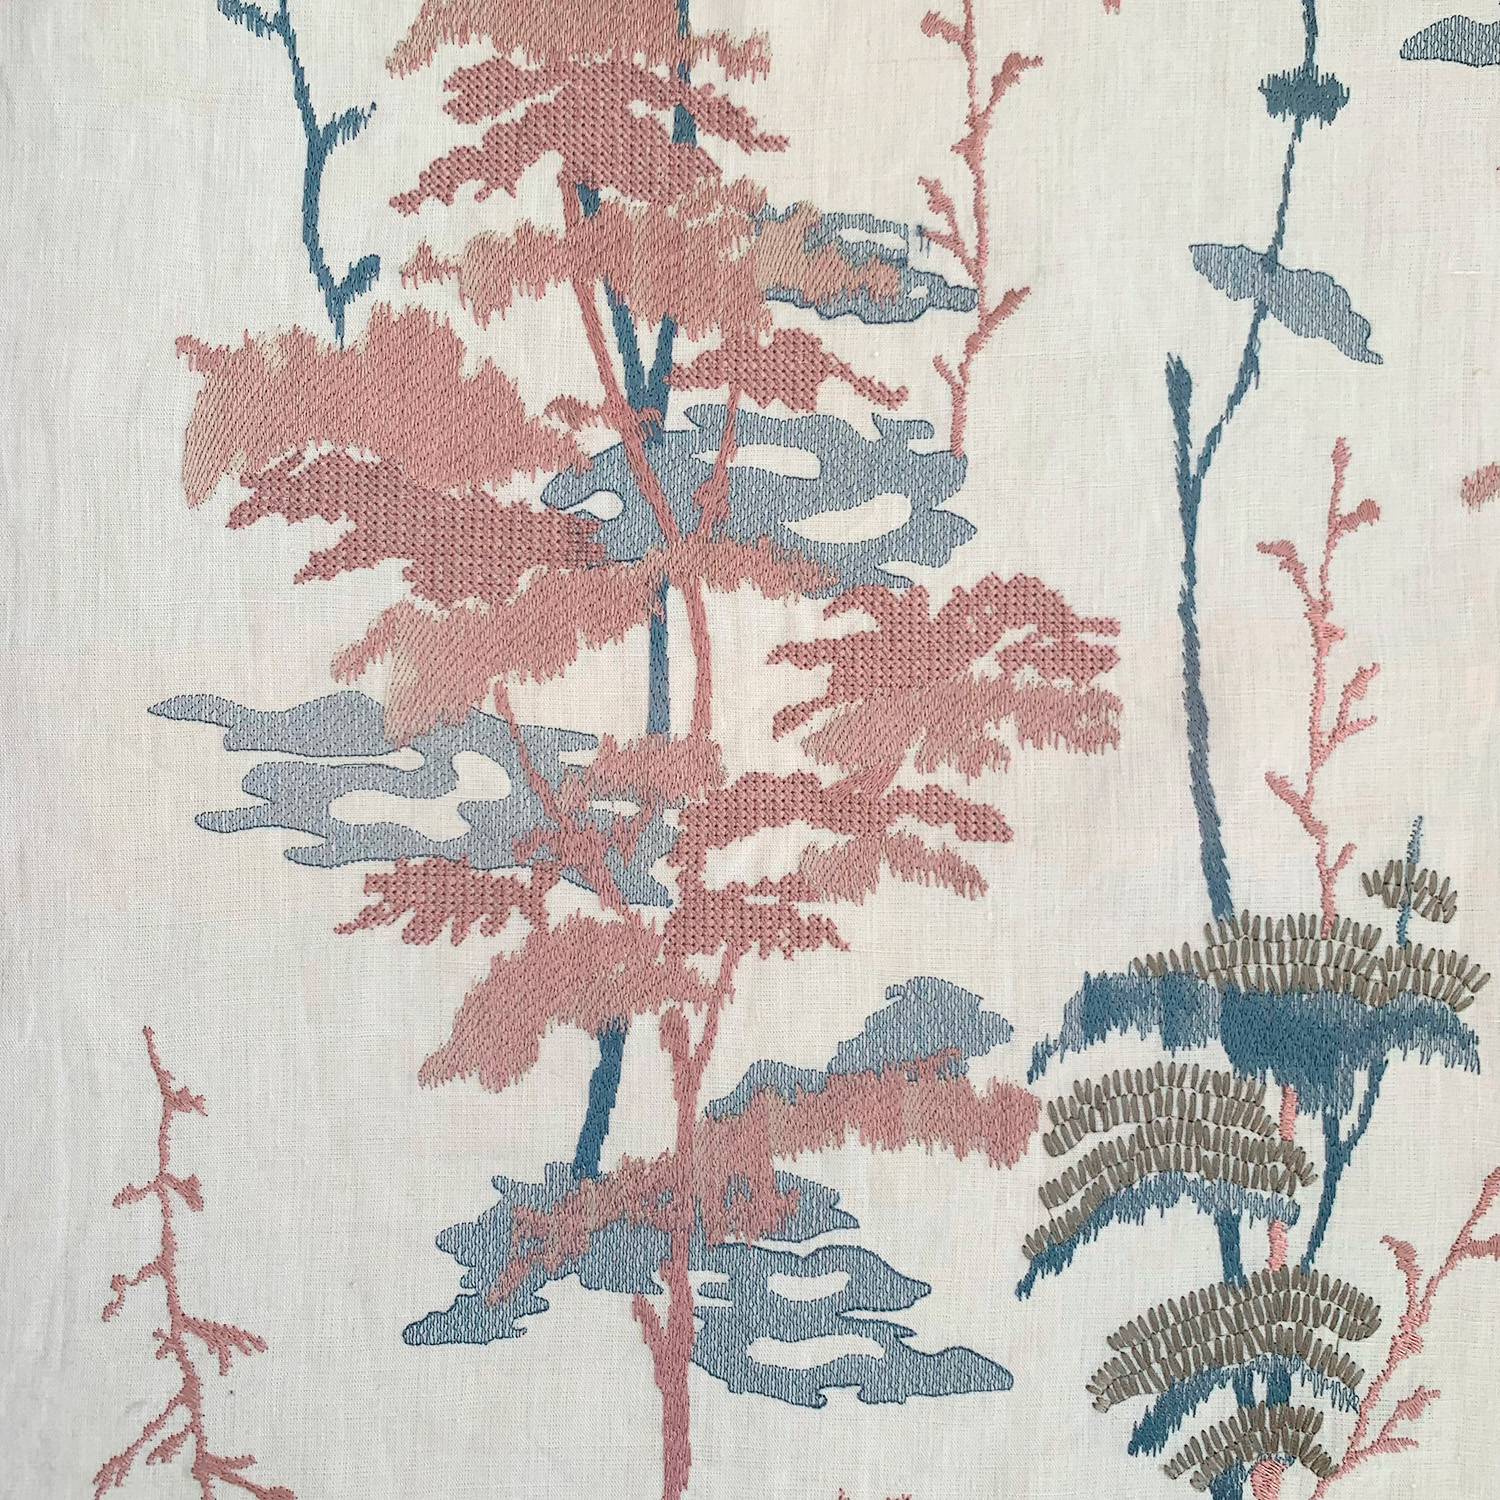 Botanical print fabric in shades of red and blue against a cream background